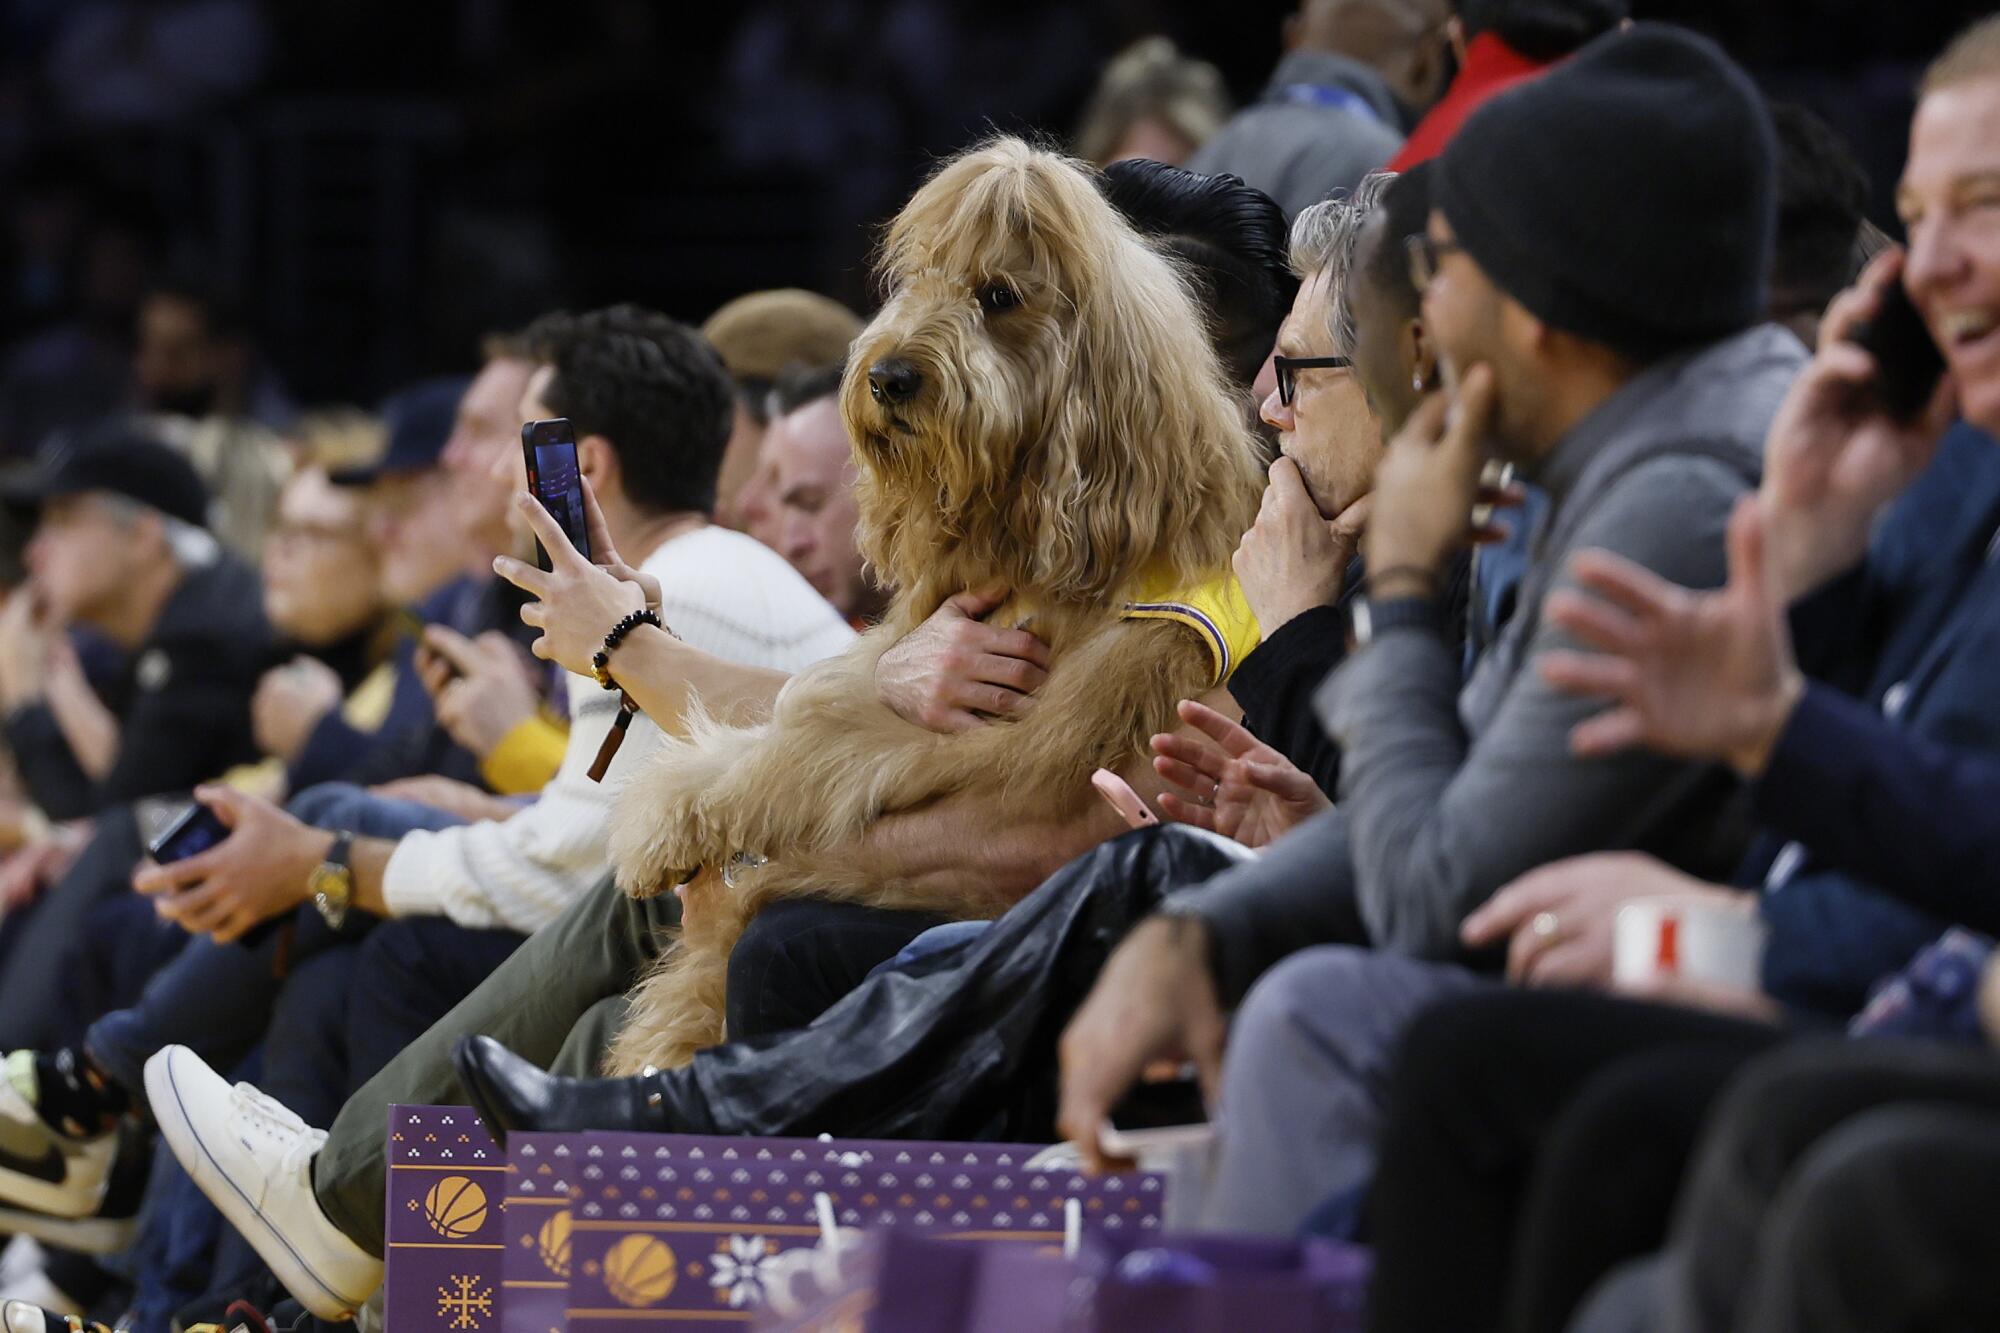 Brodie the Goldendoodle enjoy courtside seats at the Lakers vs Knicks game.